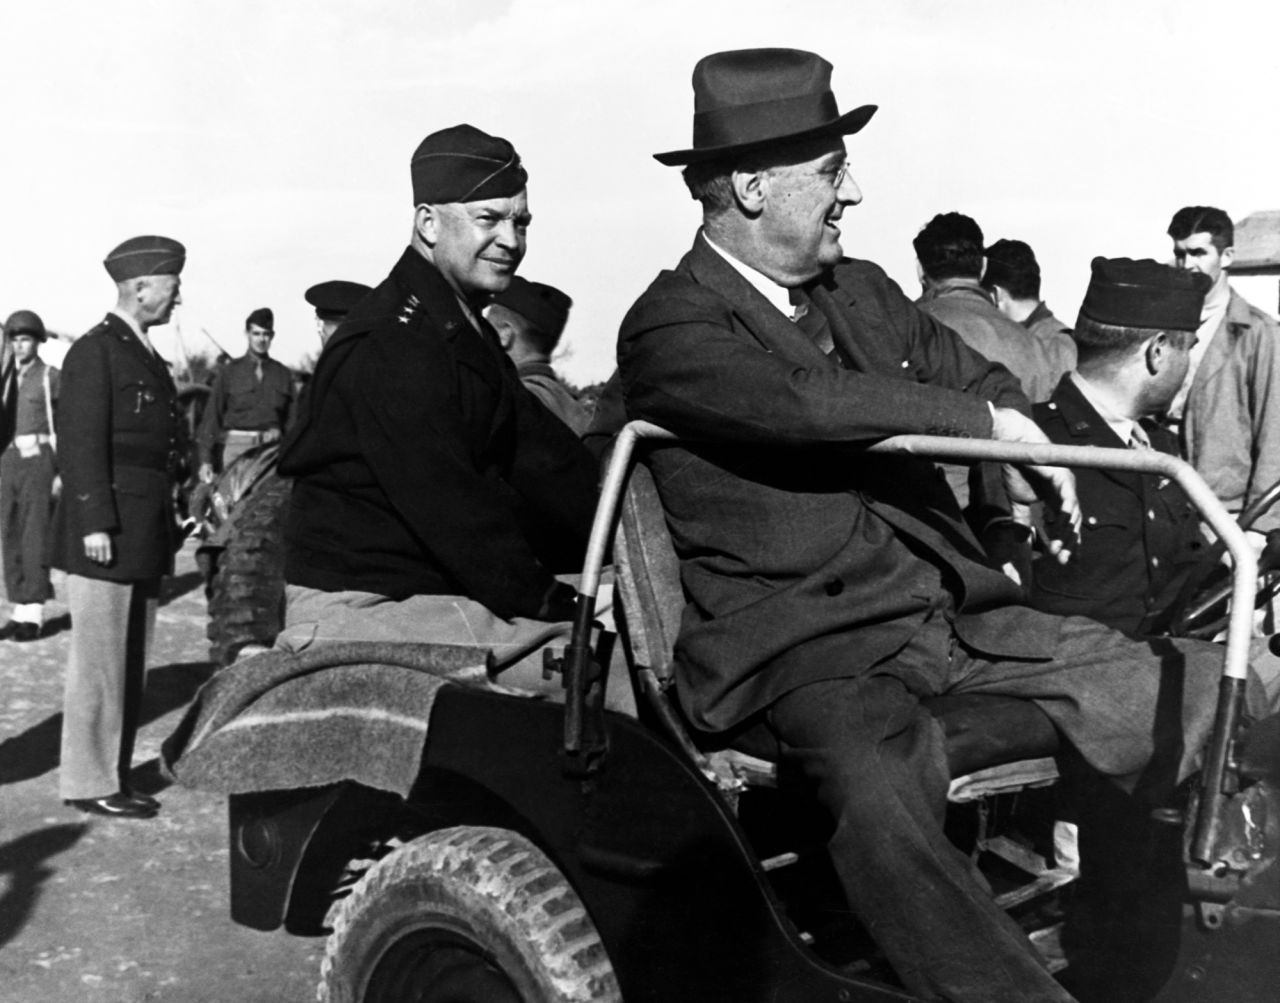 President Franklin D. Roosevelt and US Gen. Dwight D. Eisenhower share a Jeep while visiting Castelvetrano, Italy, during World War II in December 1943. Gen. George S. Patton is standing on the left.